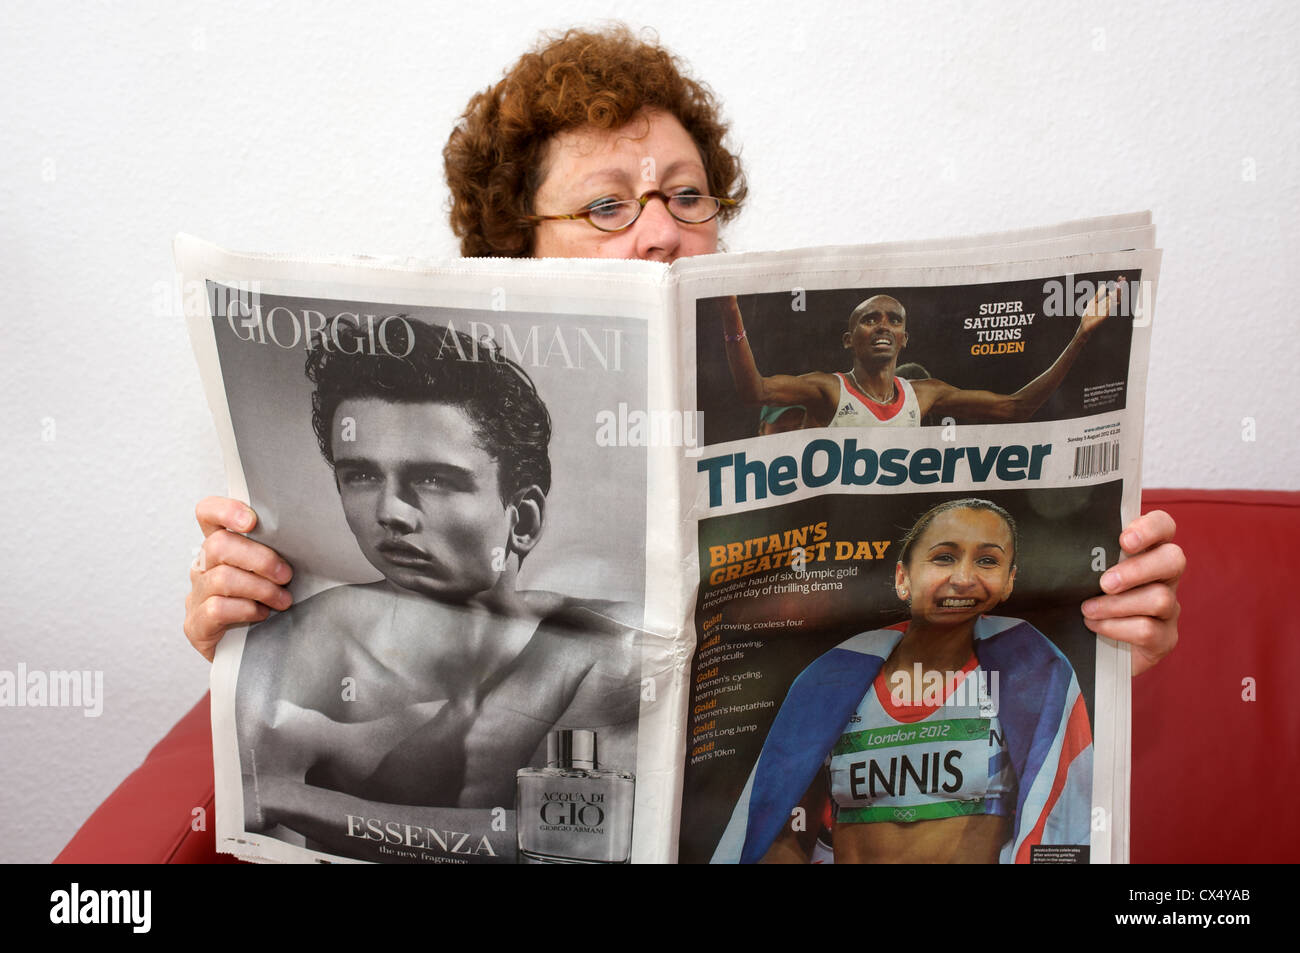 Woman reading a copy of The Observer newspaper with the headline 'Britain's greatest day' Stock Photo